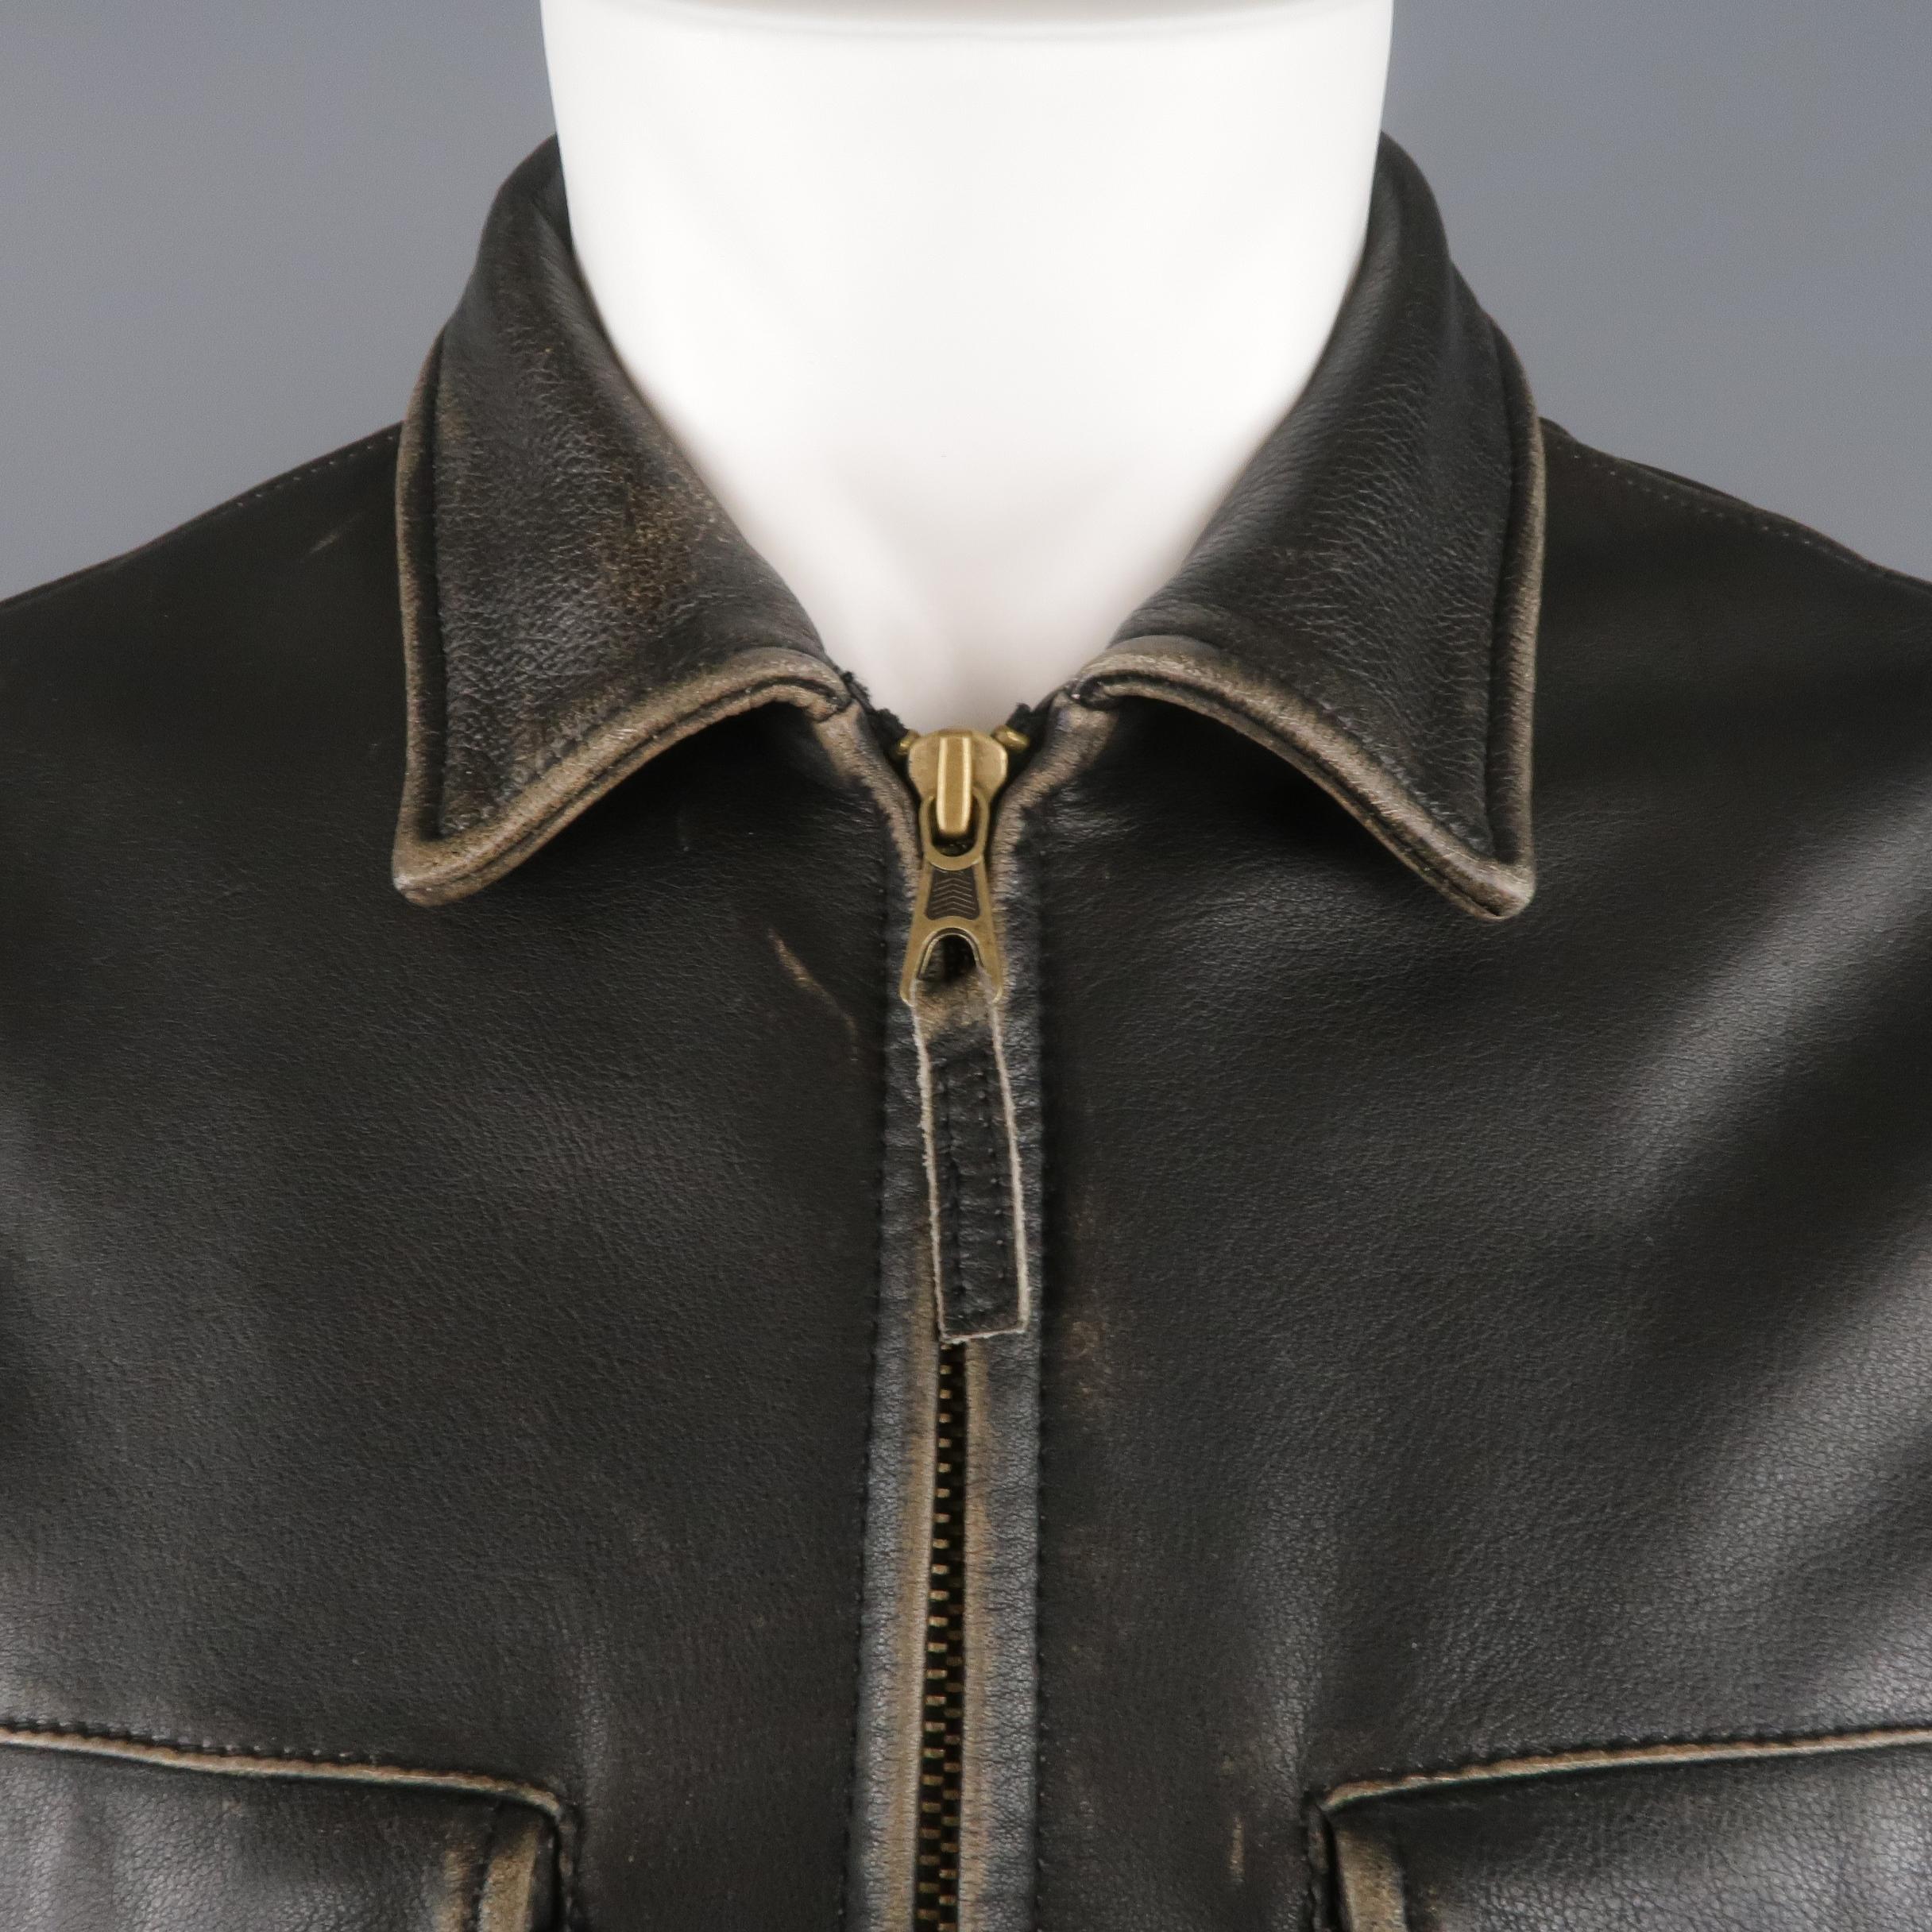 GOLDEN BEAR jacket comes in dark brown vintage look distressed leather with a pointed collar, zip front, snap flap chest pockets, slanted zip pockets, and zip cuffs. Made in USA.
 
Excellent Pre-Owned Condition.
Marked: M
 
Measurements:
 
Shoulder: